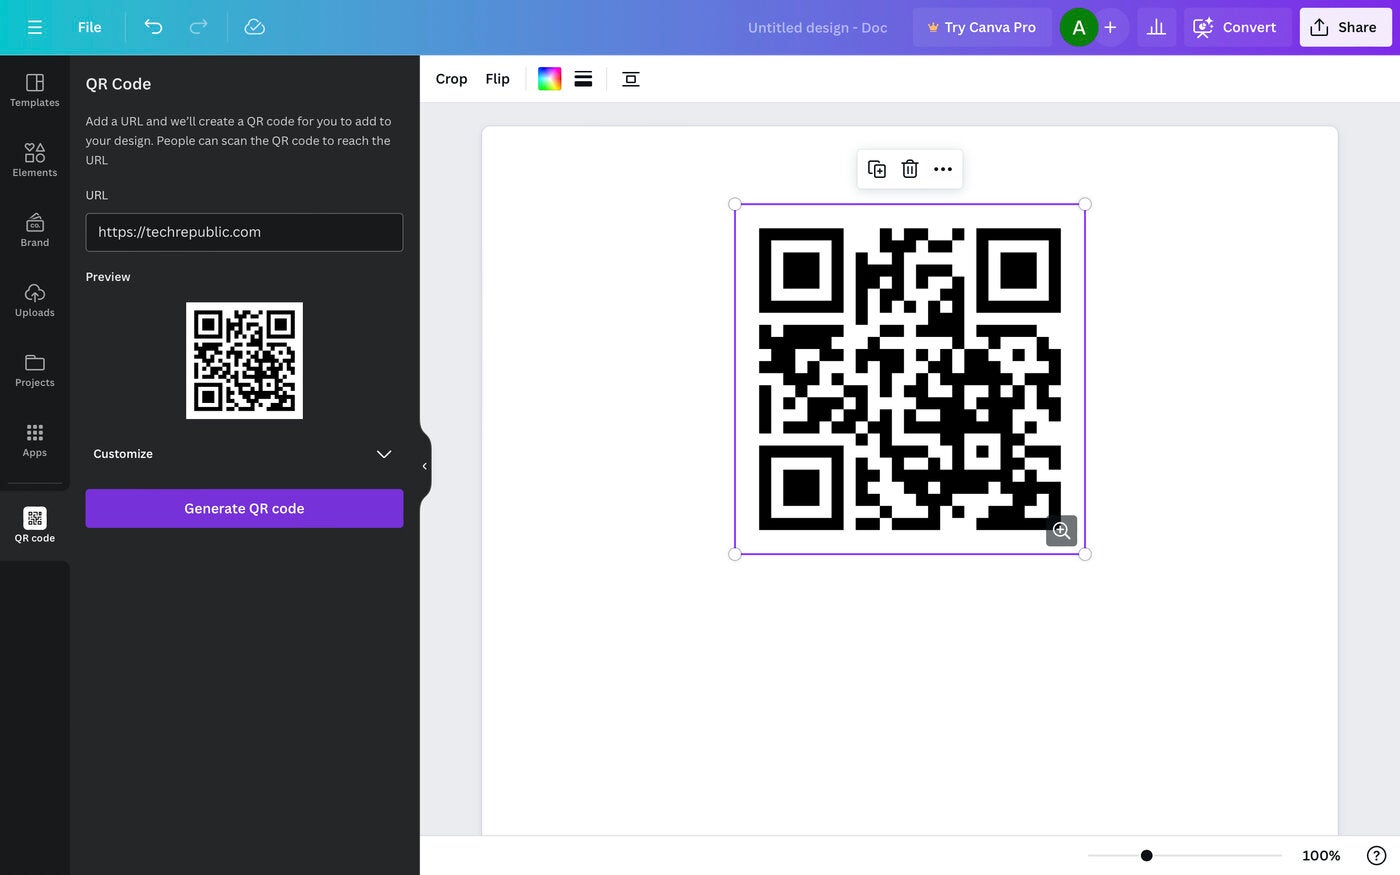 Generate and position a QR code in your design with Canva for free.